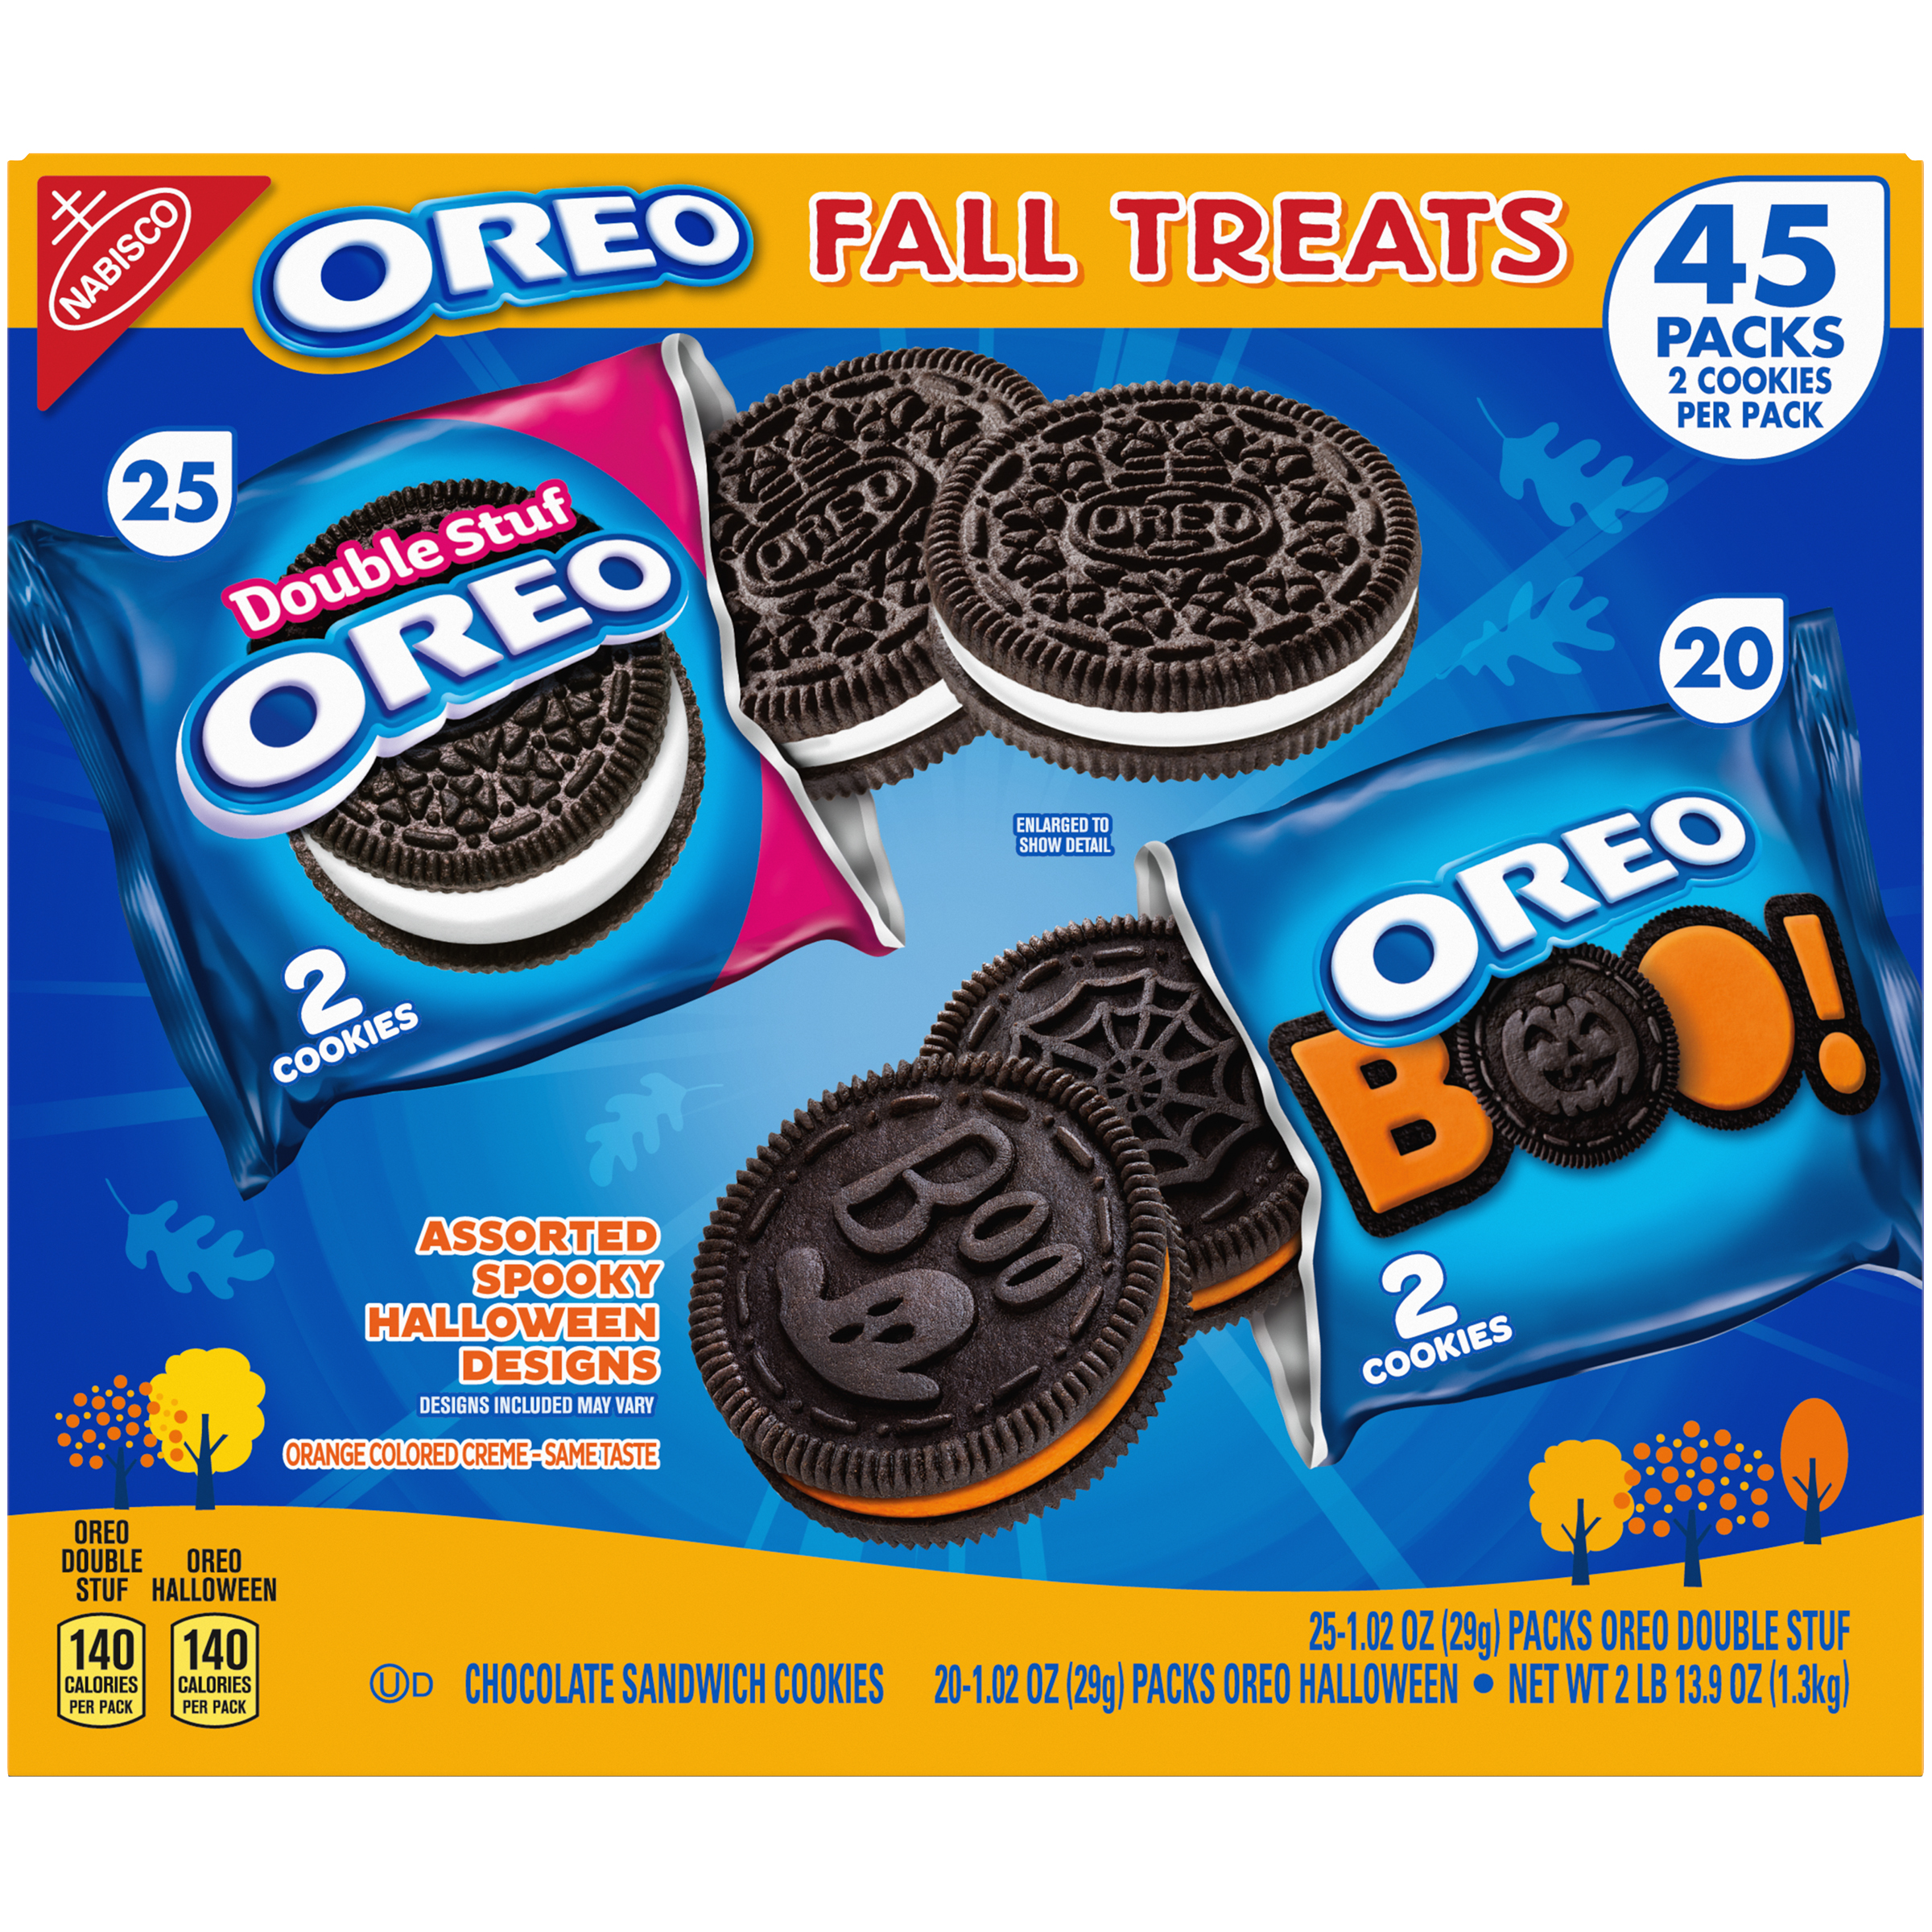 OREO Fall Treats Double Stuf Chocolate Sandwich Cookies and Halloween Cookies Variety Pack, 45 Trick or Treat Bags (2 Cookies Per Snack Pack)-4